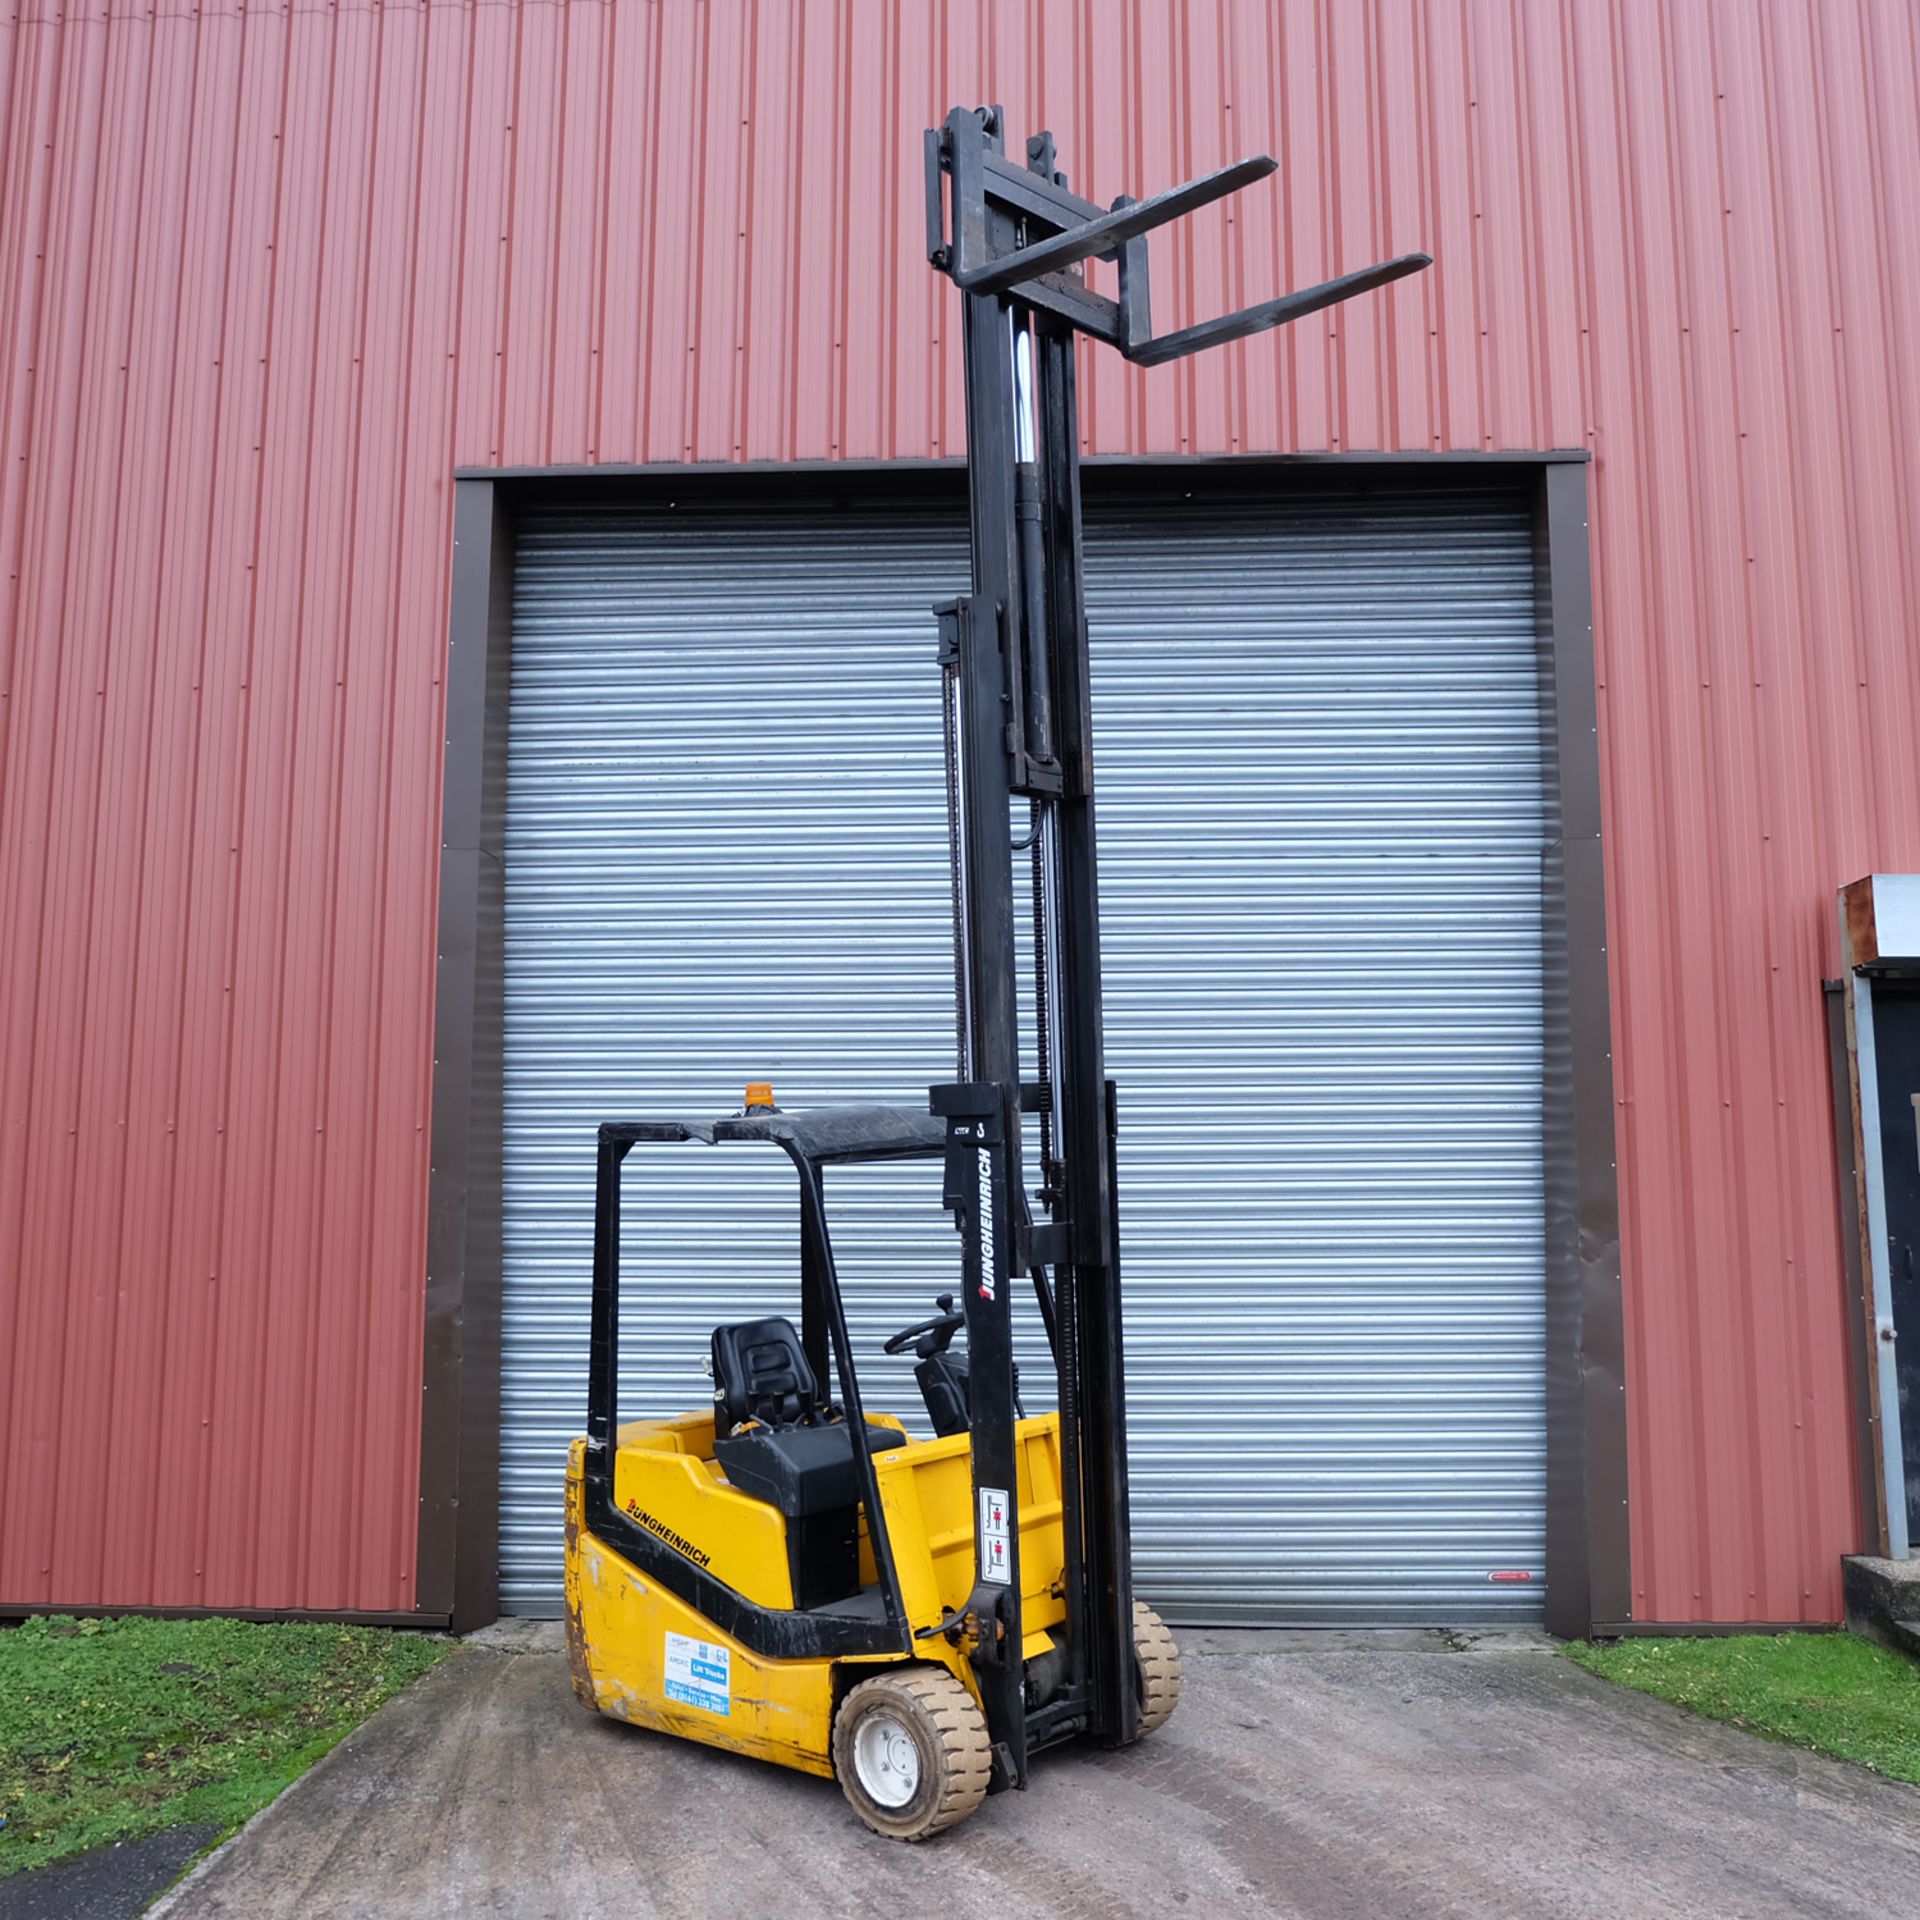 Jungheinrich 1800kg 3 Wheel Electric Forklift Truck with Charger. (1997) - Image 3 of 16